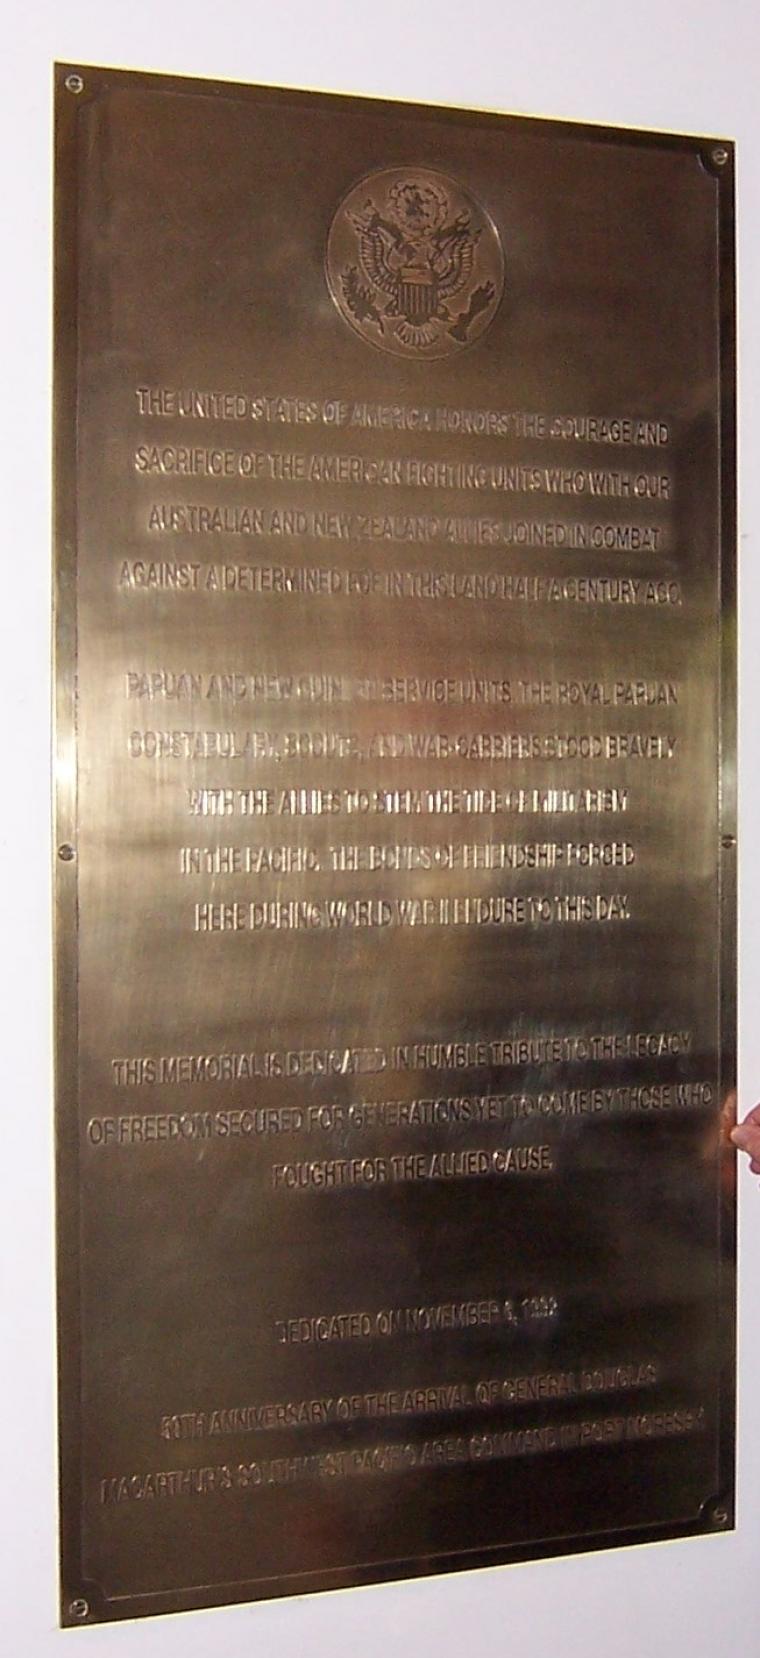 A bronze tablet serves as the Marker at Papua New Guinea.